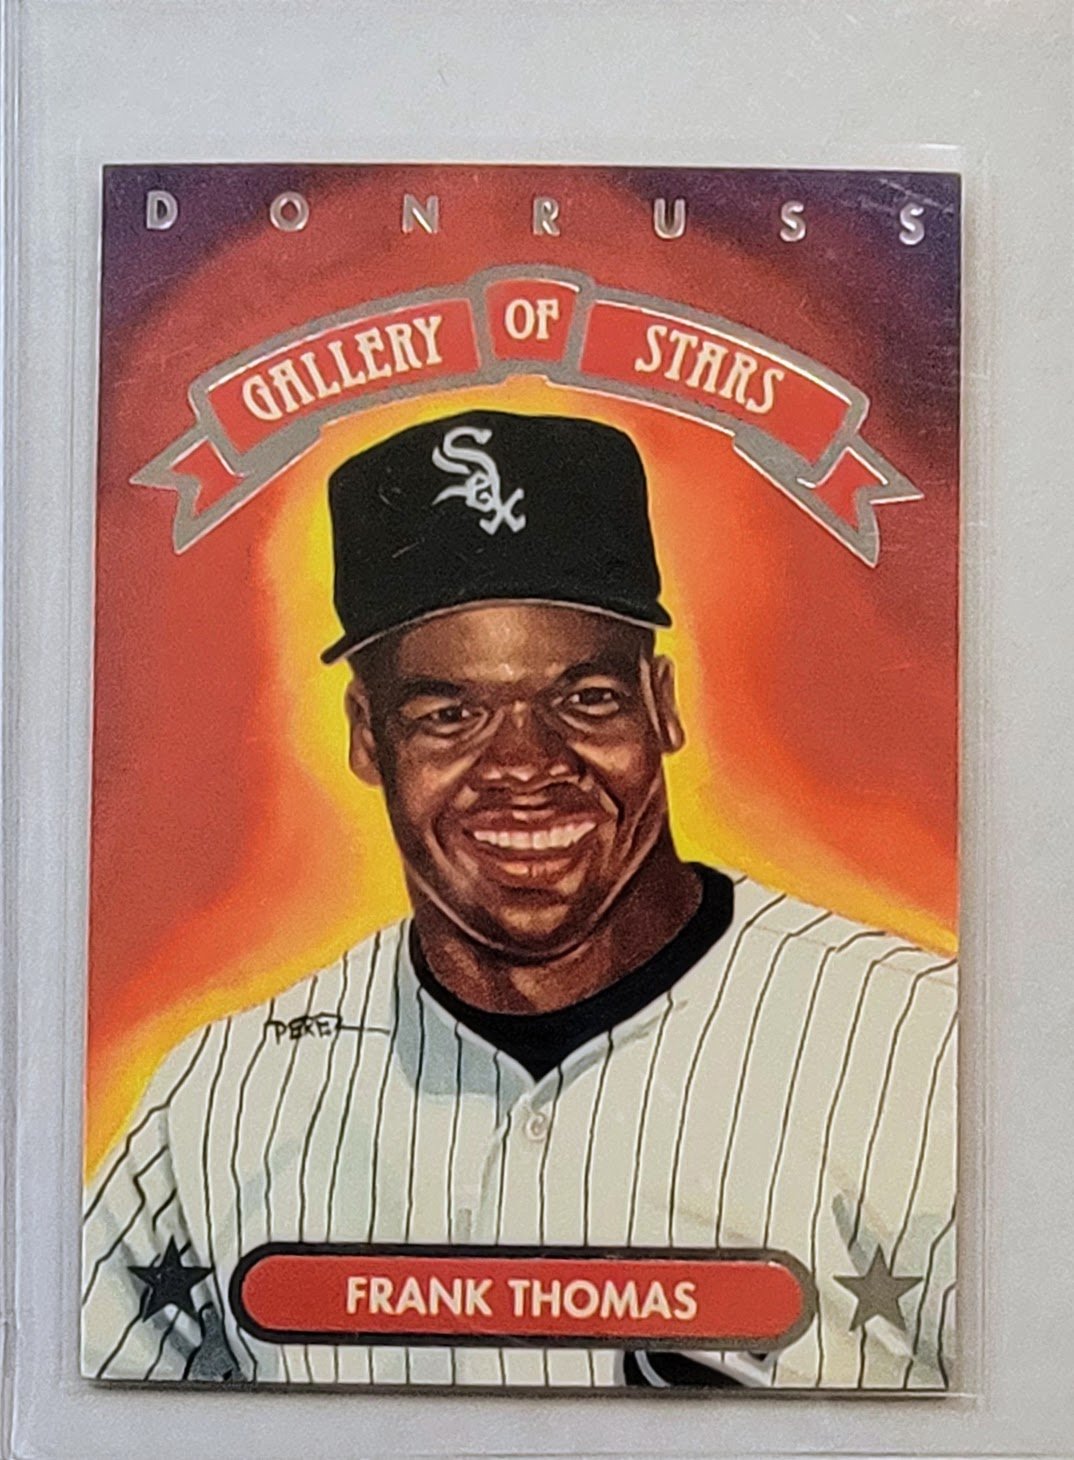 1993 Donruss Gallery of Stars Frank Thomas Baseball Trading Card TPTV simple Xclusive Collectibles   